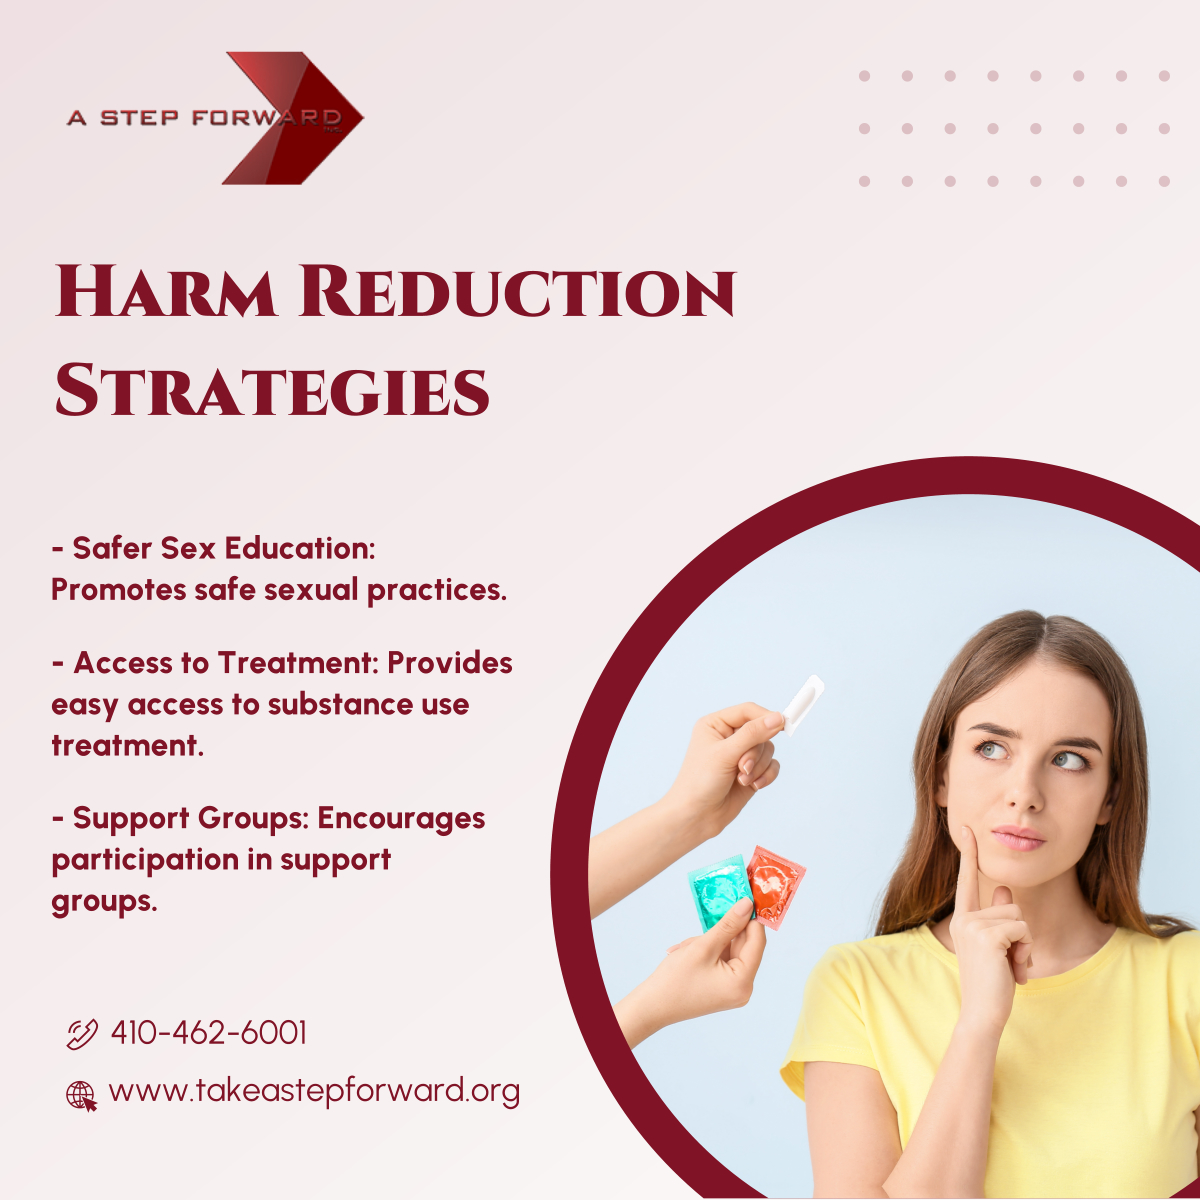 Harm reduction strategies are a pragmatic and compassionate approach to addressing the complex issues of substance use and risky behaviors. They prioritize the well-being of individuals.

#CharityOrganization #BaltimoreMD #HarmReductionStrategies